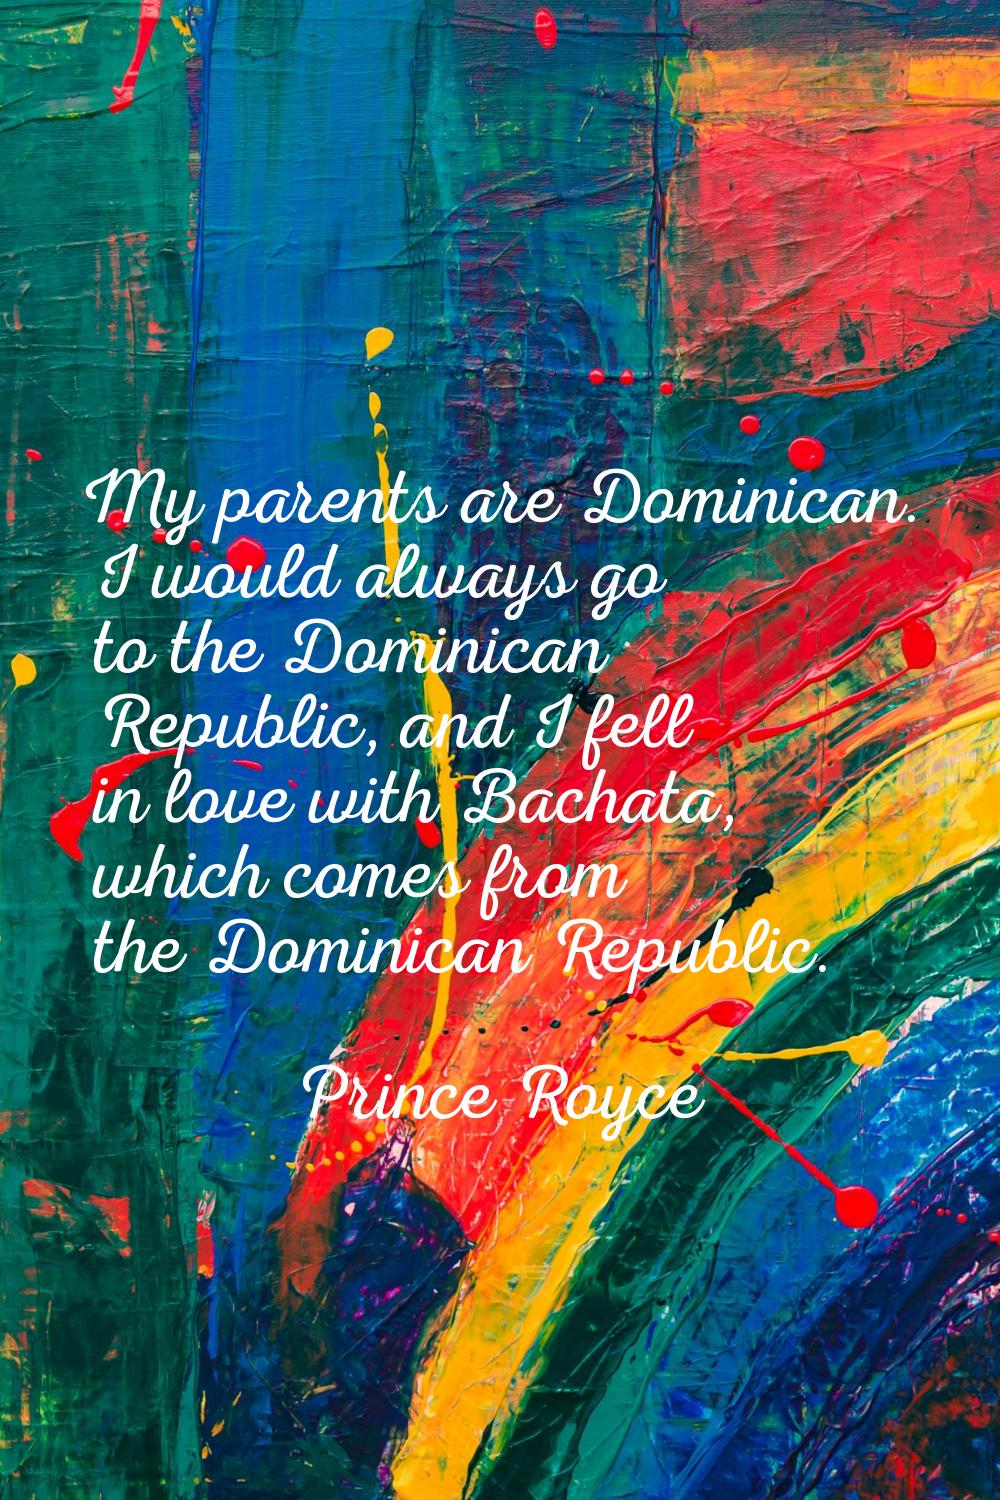 My parents are Dominican. I would always go to the Dominican Republic, and I fell in love with Bach